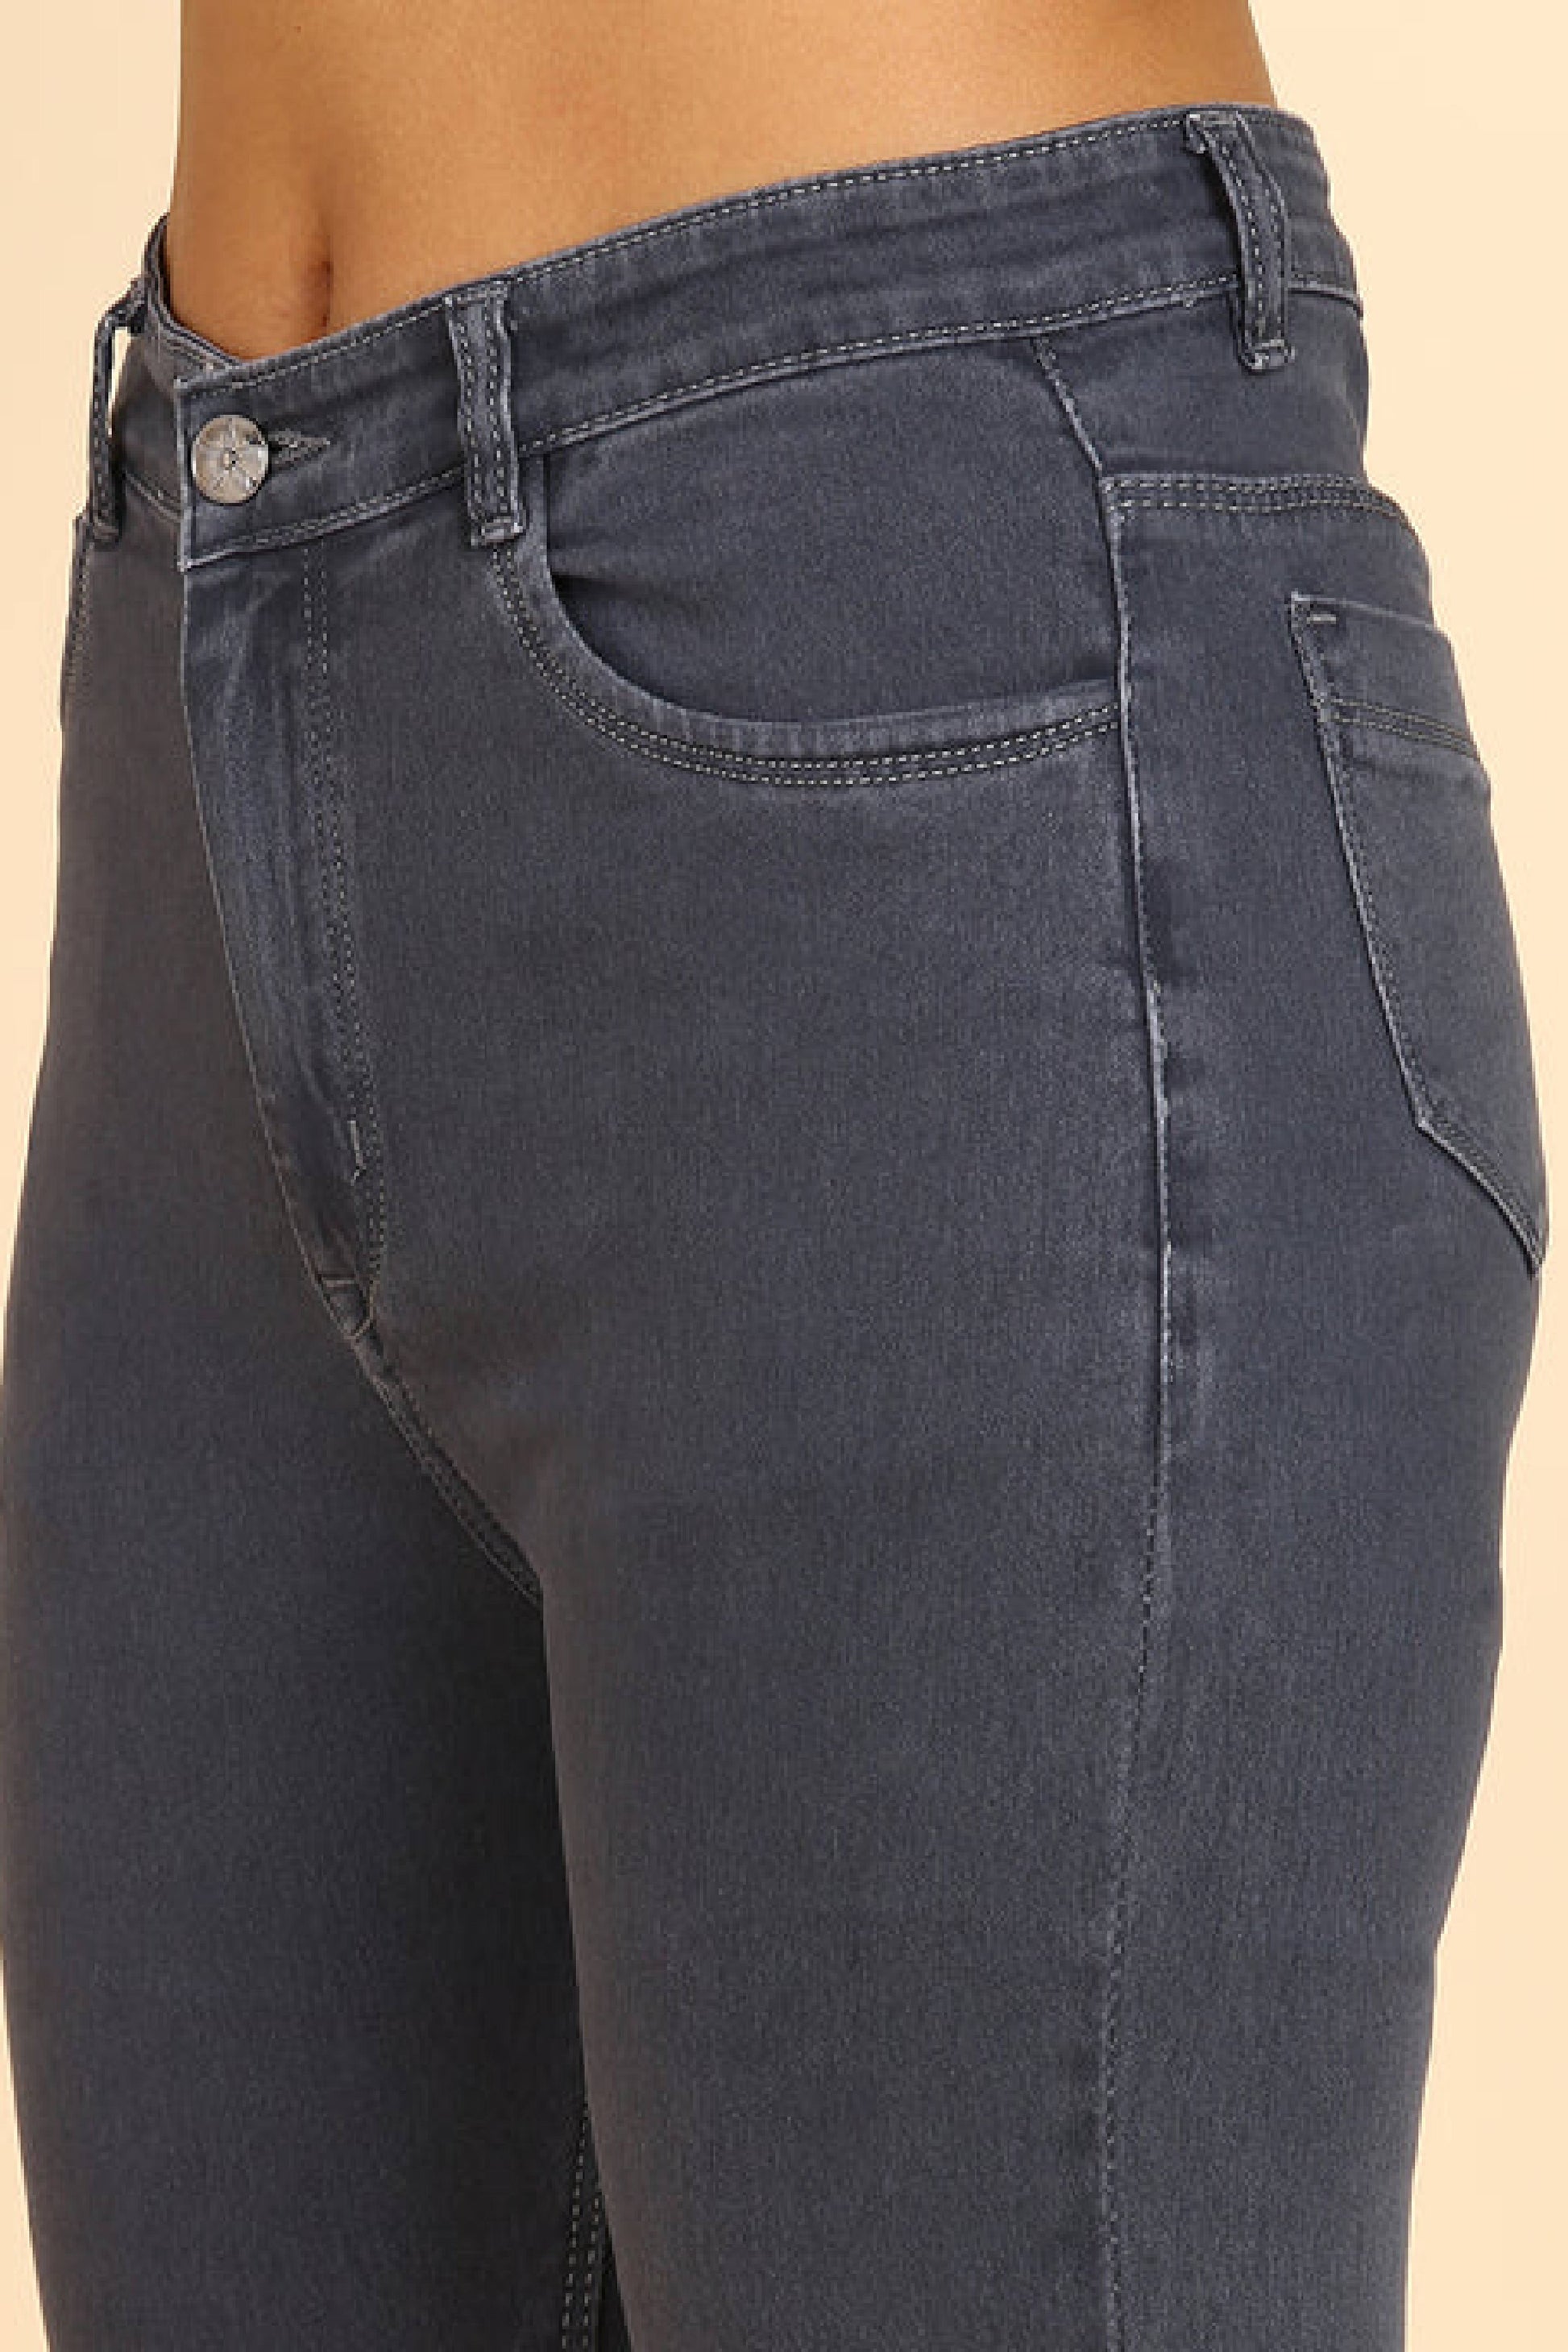 Grey colour slim fit jeans for womens